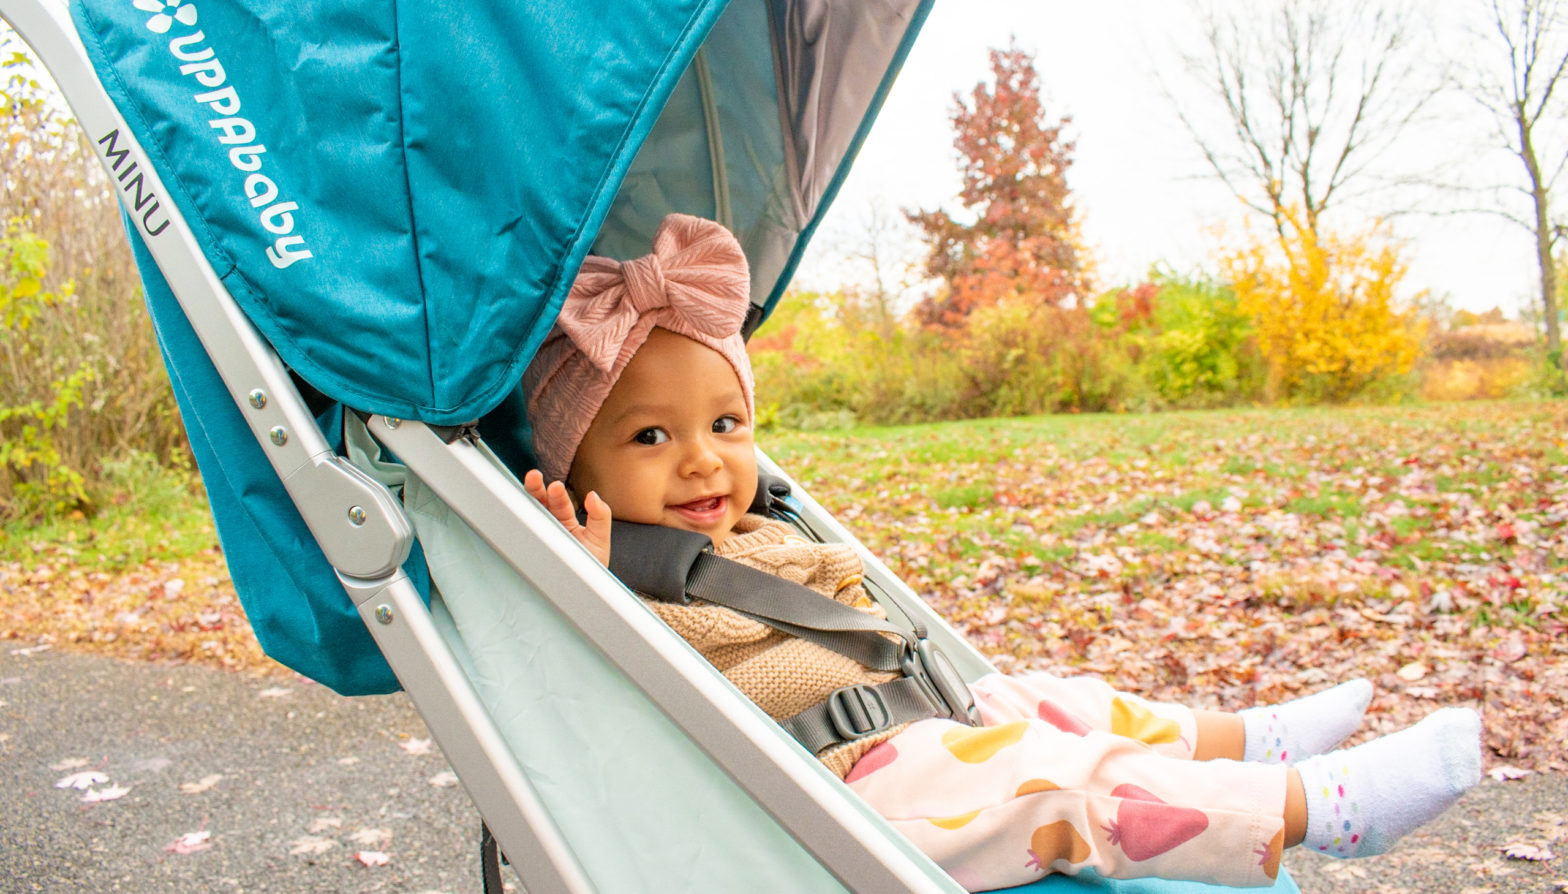 5 Compact Travel Strollers That Fit In Overhead Bins